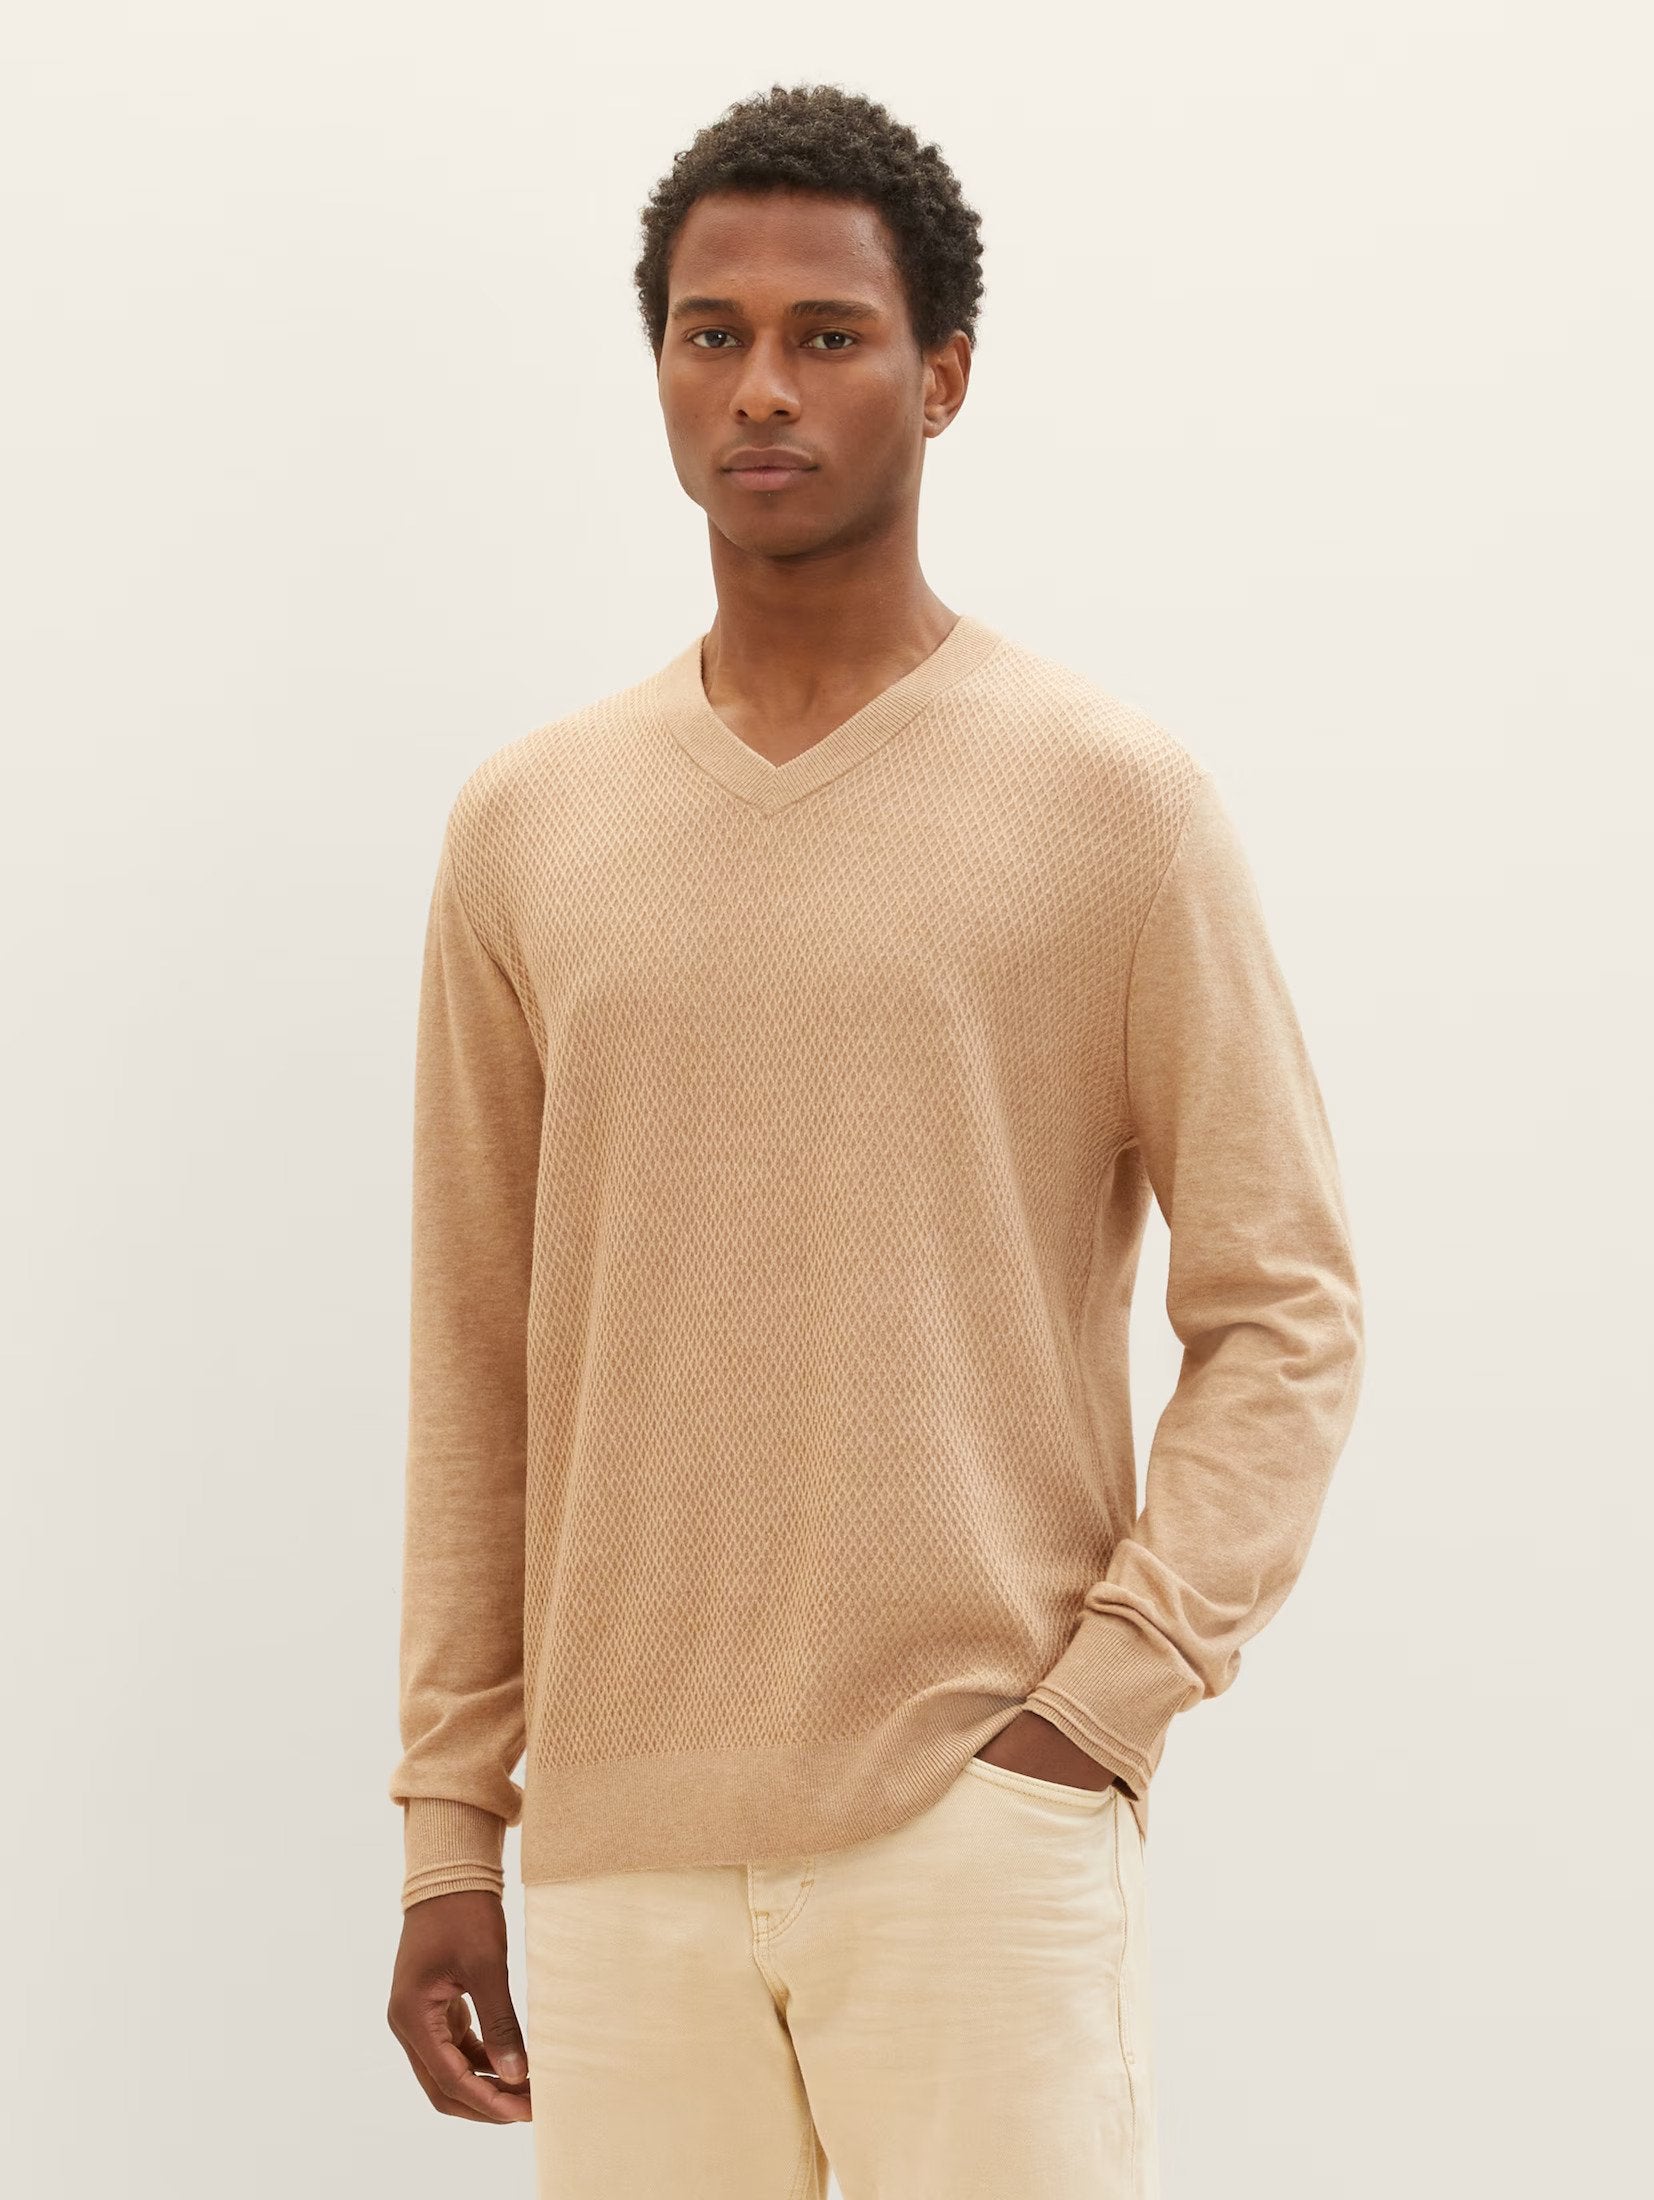 Tom Tailor Brown Knitted V-Neck Sweater